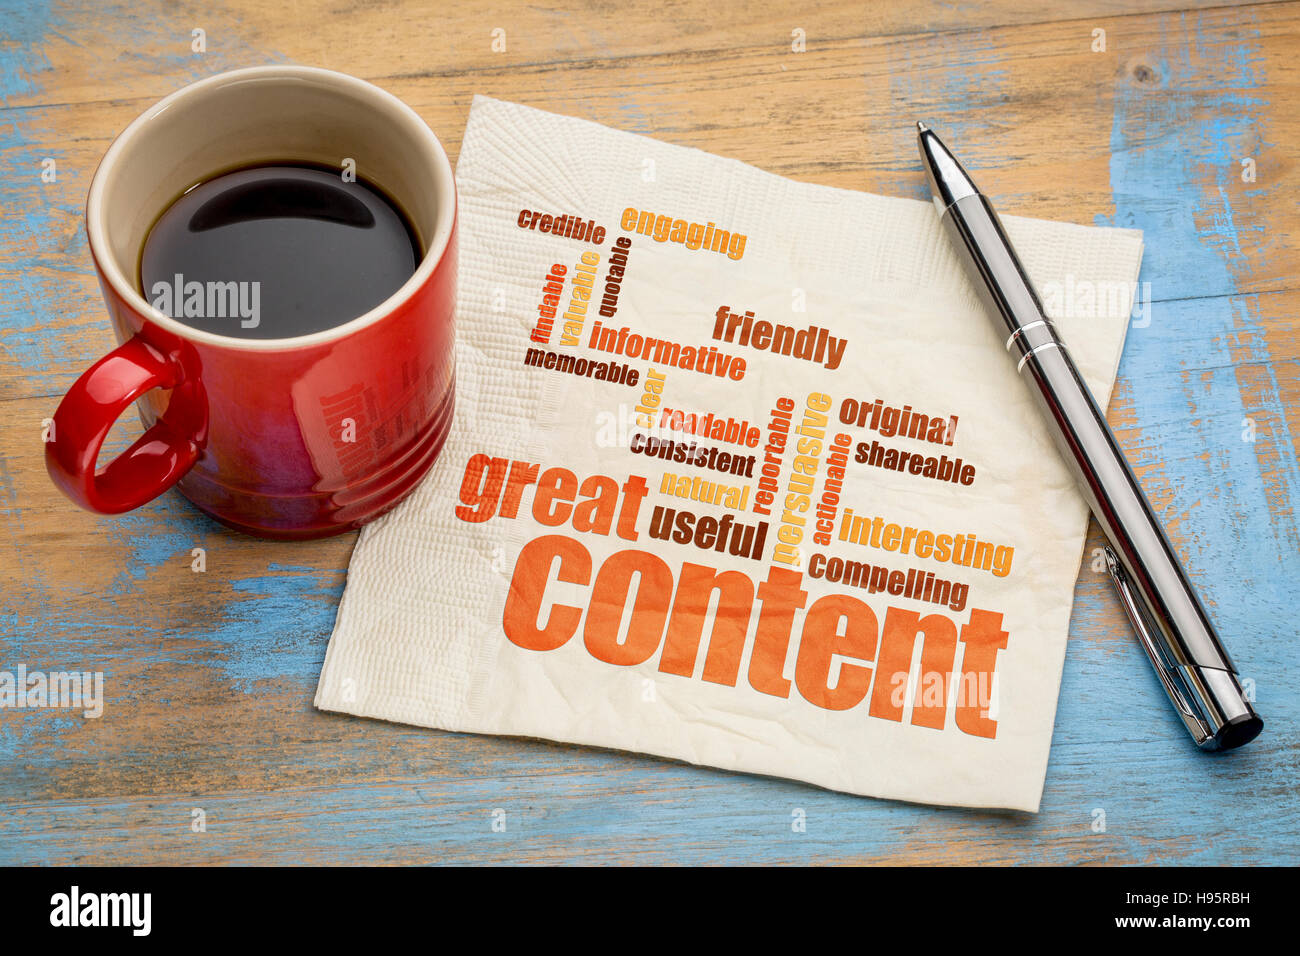 business writing and content marketing concept - great content word cloud on a napkin with a cup of coffee Stock Photo